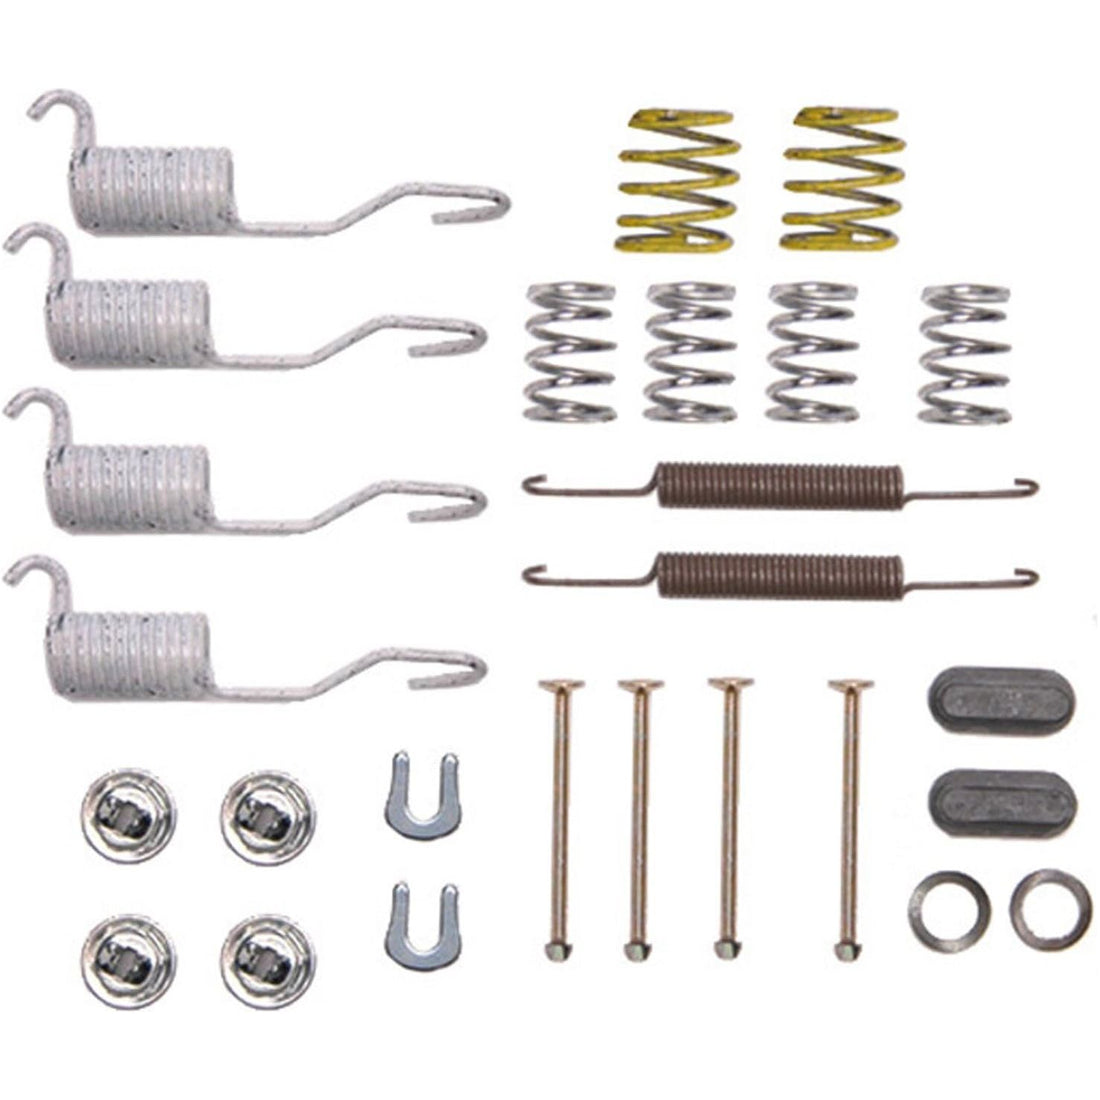 ACDelco Professional 18K584 Rear Drum Brake Spring Kit with Springs, Pins, Retainers, Washers, and Caps